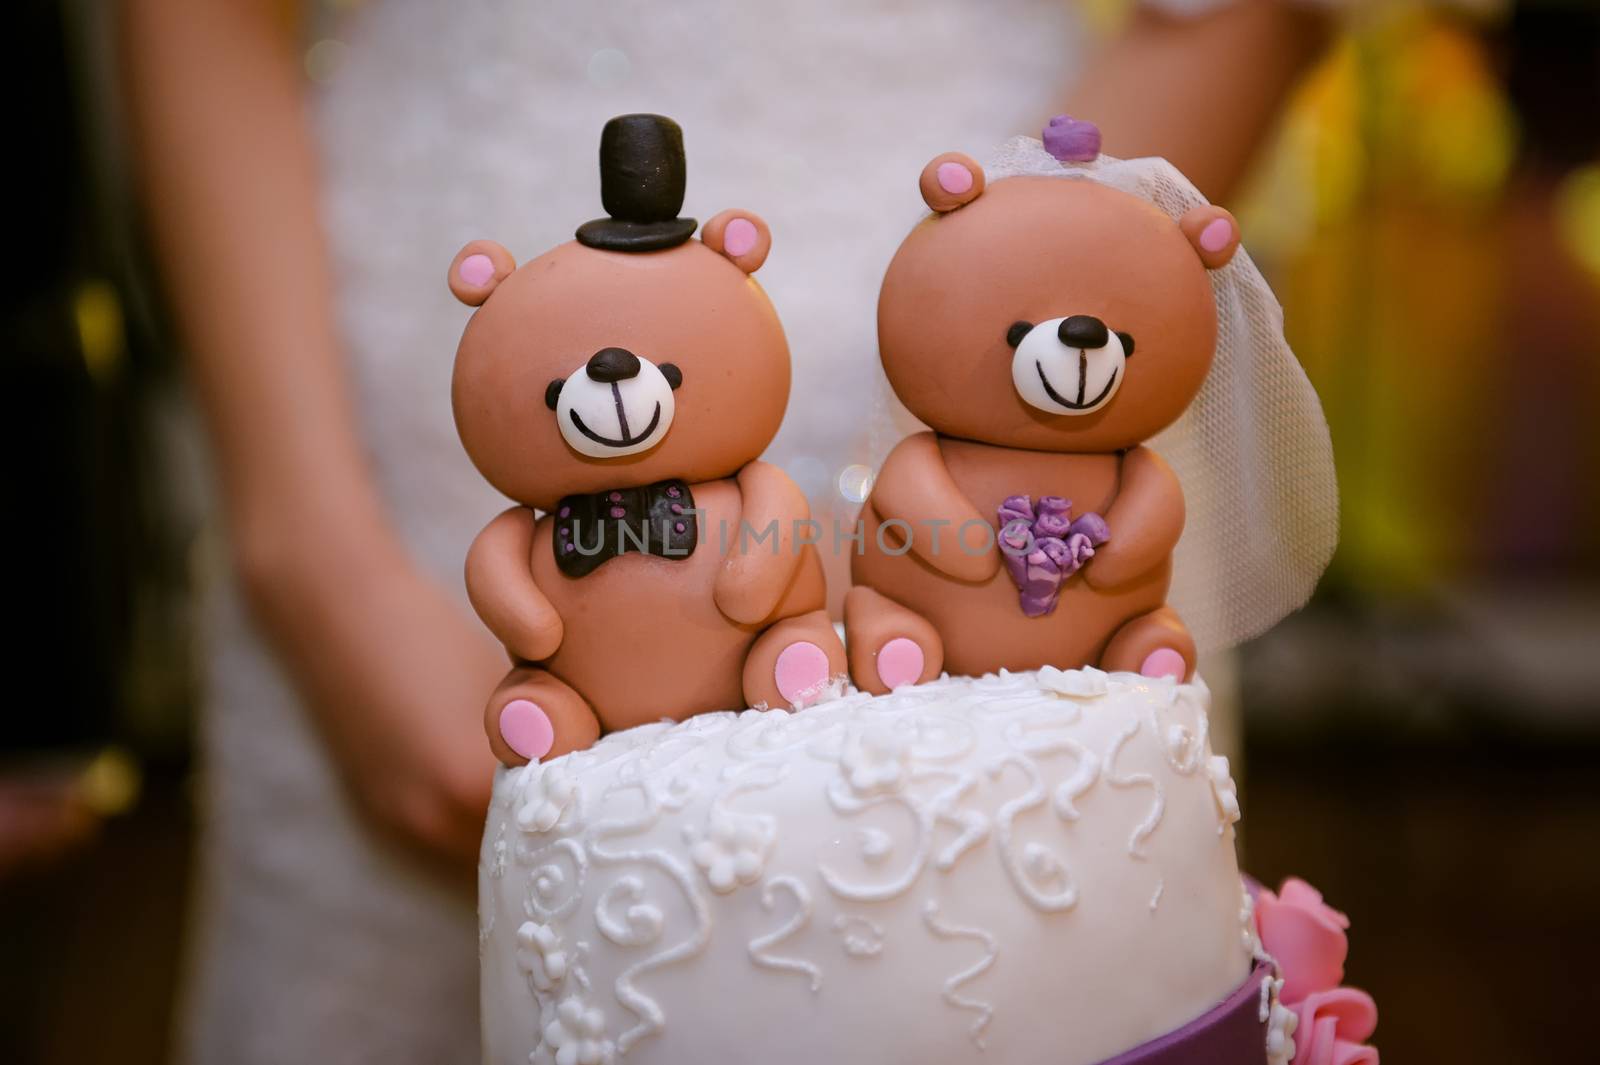 beautiful wedding cake with a teddy bear at the top